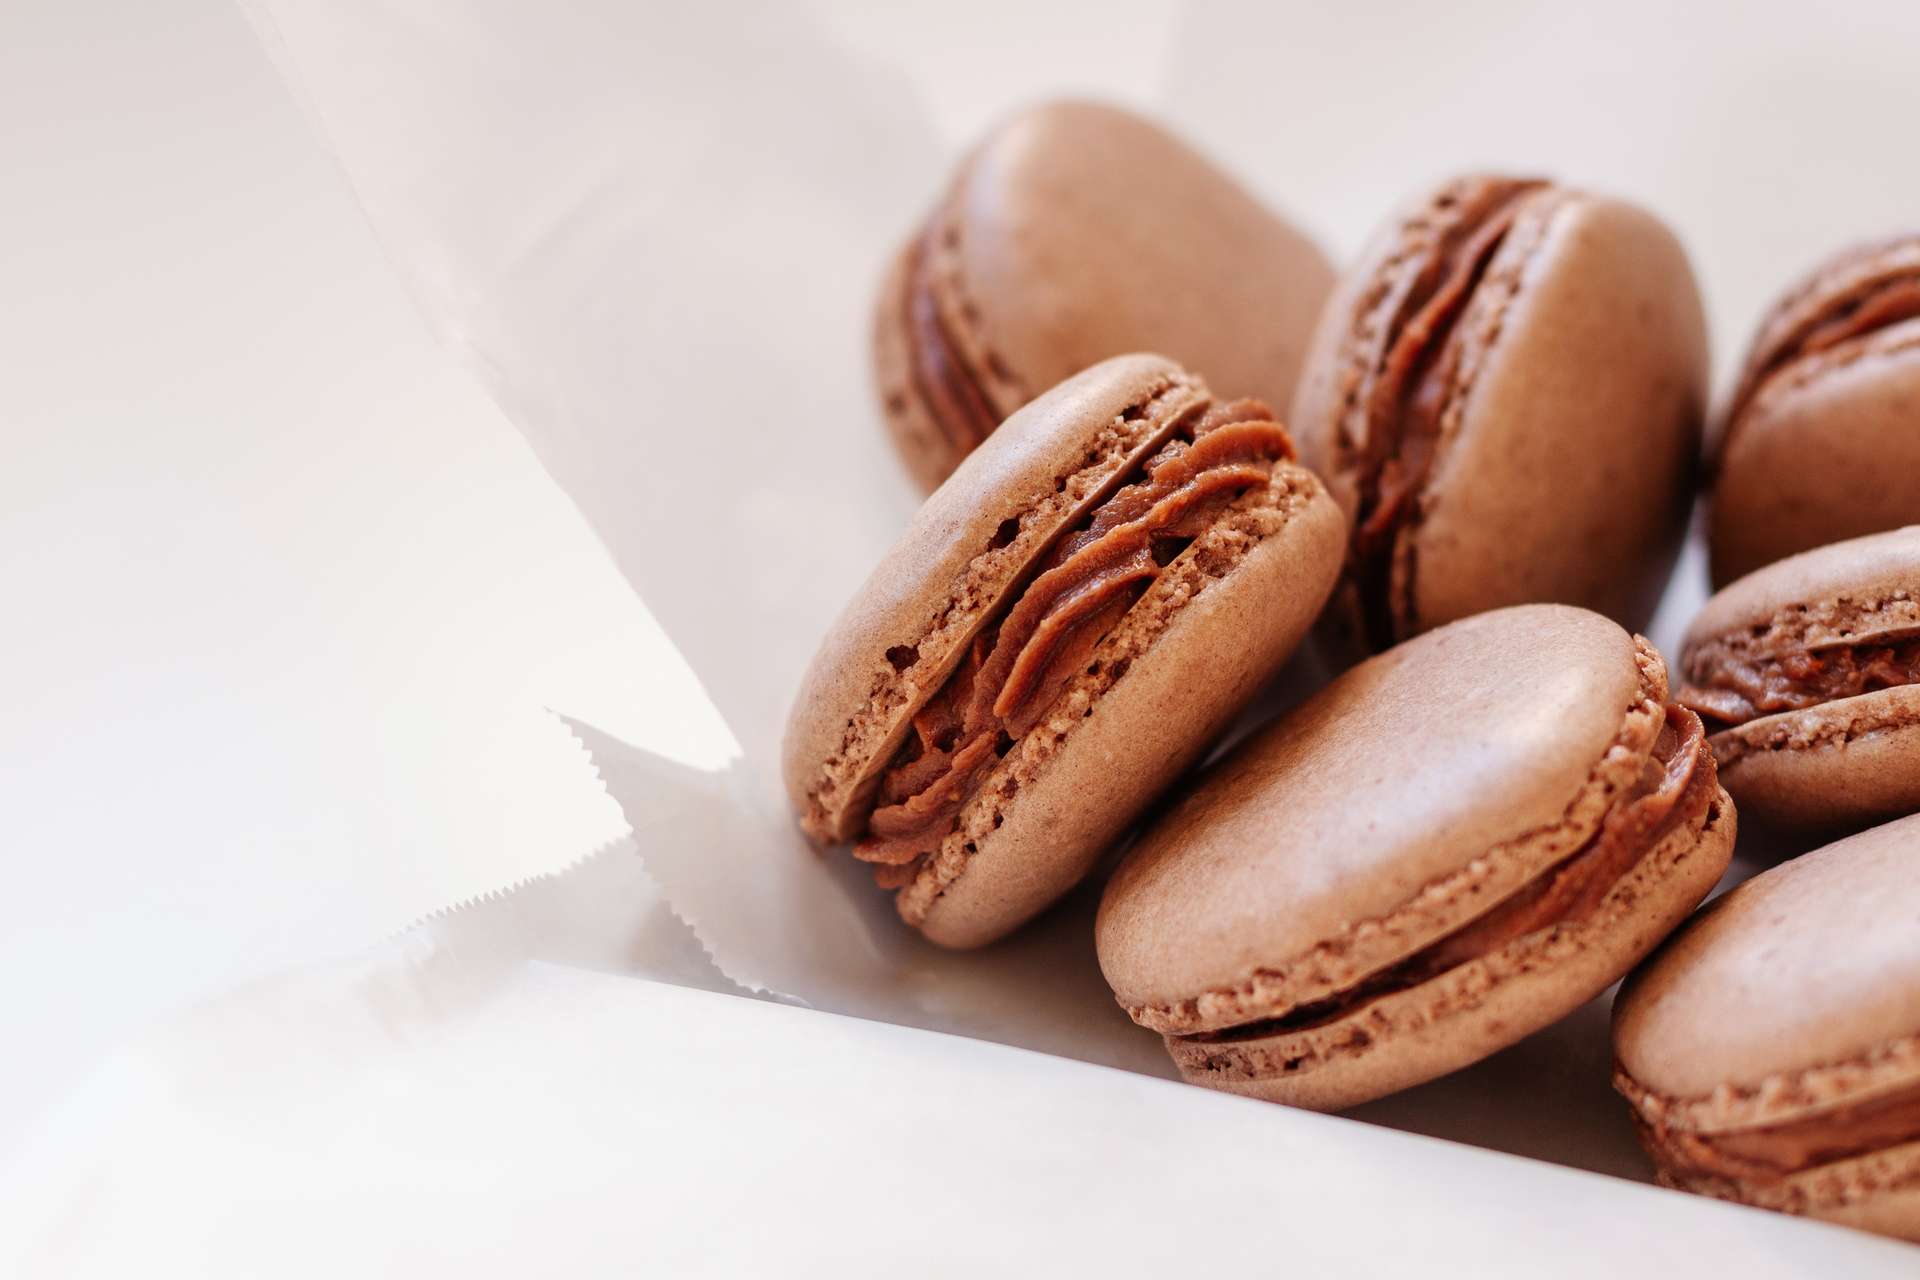 7 Best Macaron Recipes - How to Make French Macarons